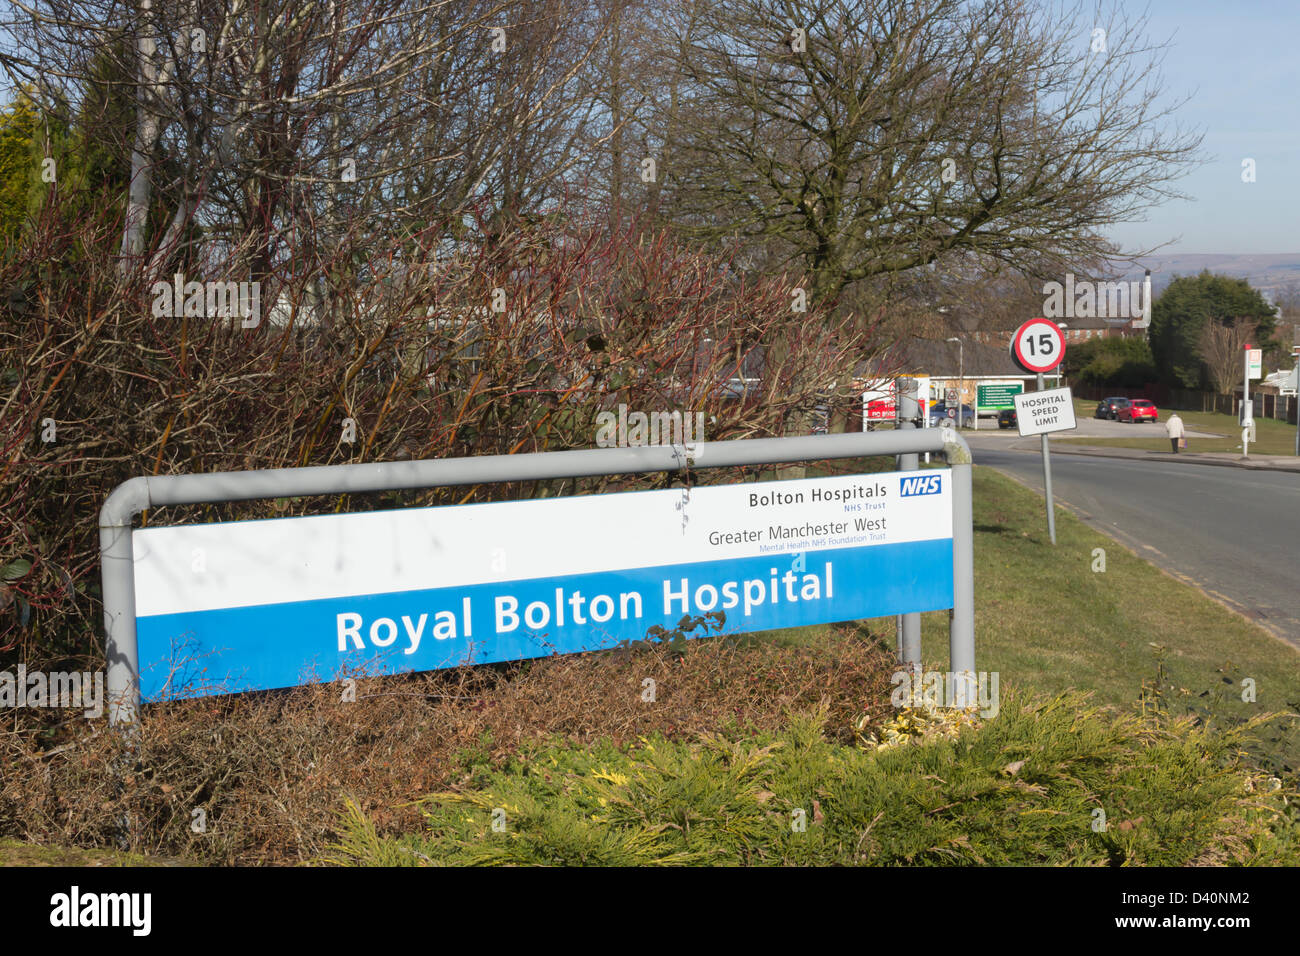 Royal Bolton Hospital,Lancashire. 28th February 2013. Sign at Redgate Way entrance. The Royal Bolton Hospital is under investigation regarding 800 recorded deaths from septicaemia in the 13 months to April 2012, 4 times higher than expected in a comparable NHS Trust. Information given to Bolton NHS Foundation Trust highlights potential discrepancies in the way the Trust has coded mortality information. Credit:  Joseph Clemson / Alamy Live News Stock Photo